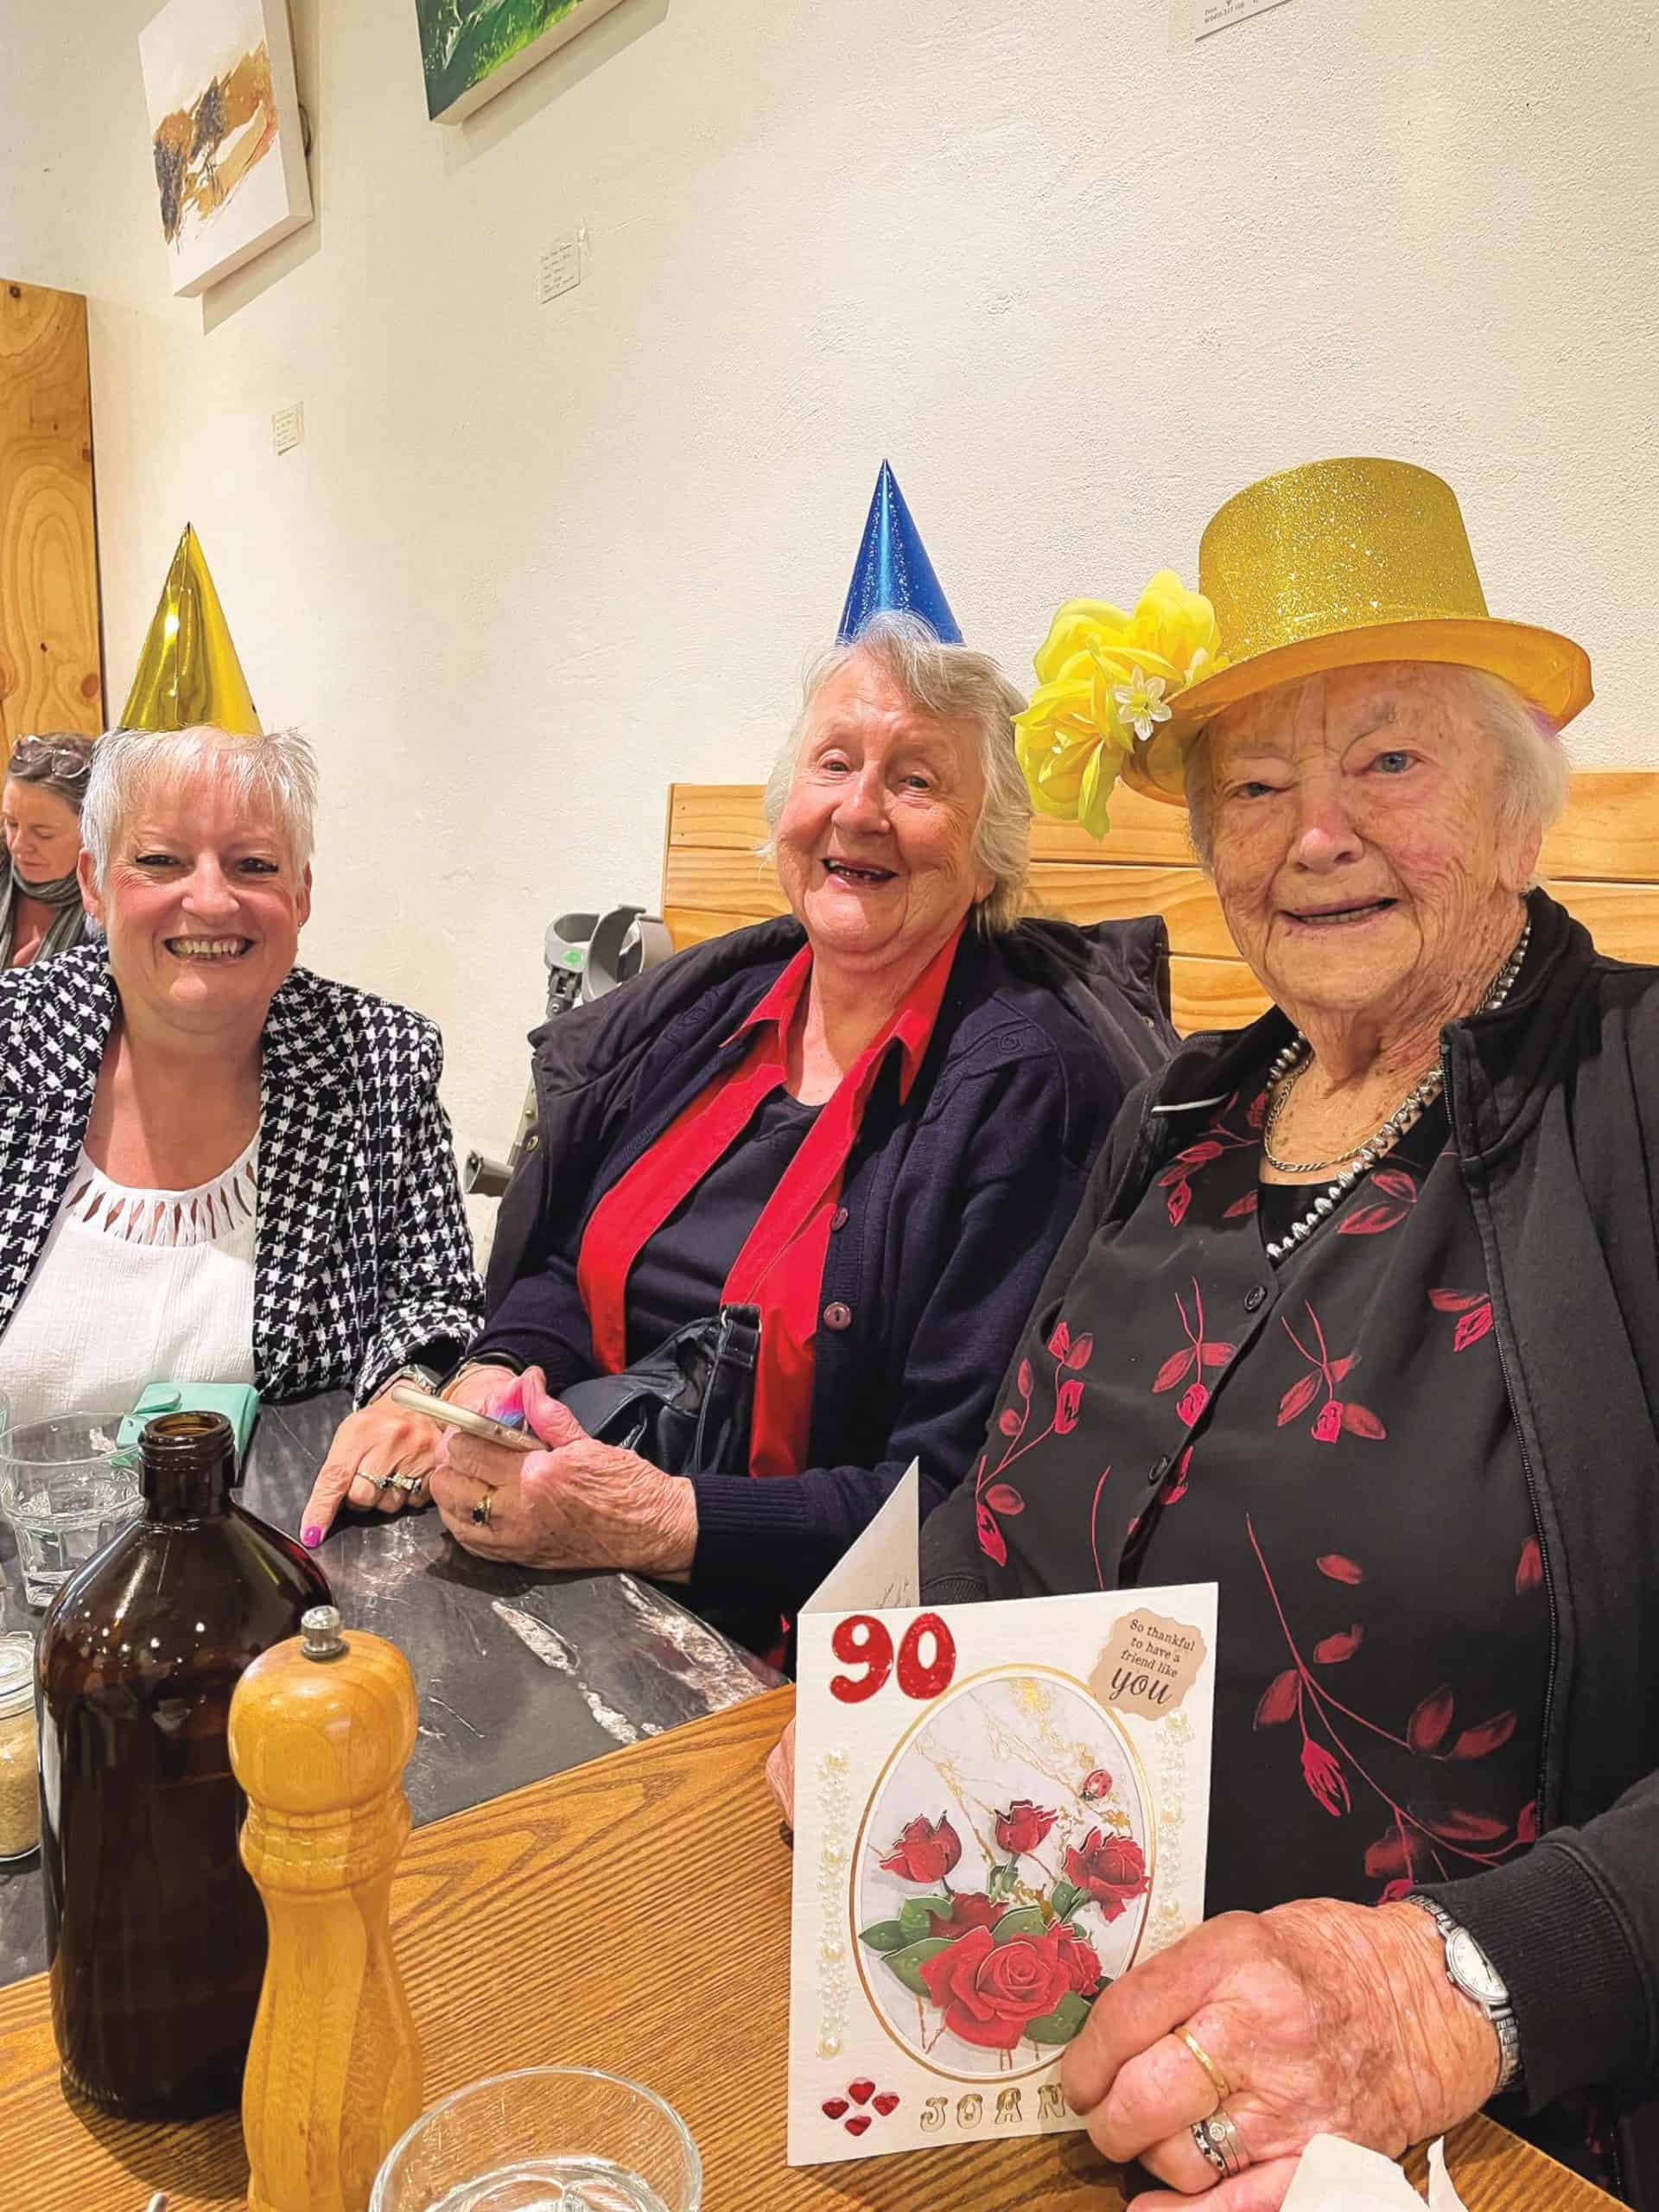 Joan (right) on her 90th birthday.